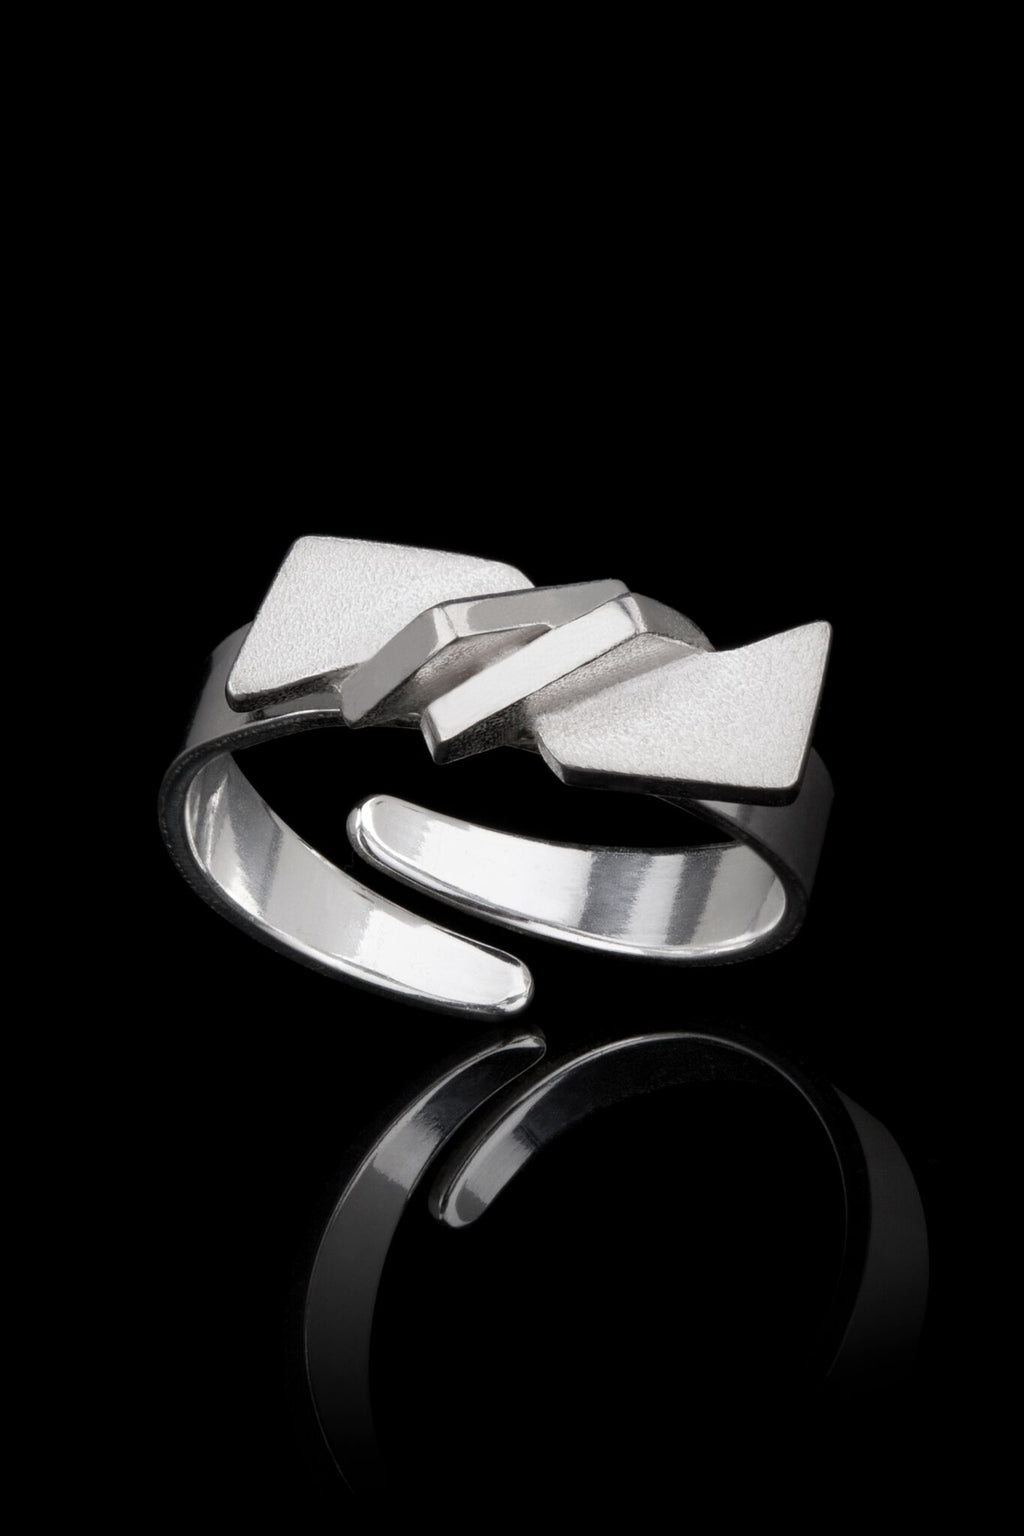 IGJ Design - Mountain Ring Rings - Norwegian Jewelry features artisan jewellery designers and goldsmiths from Norway. 